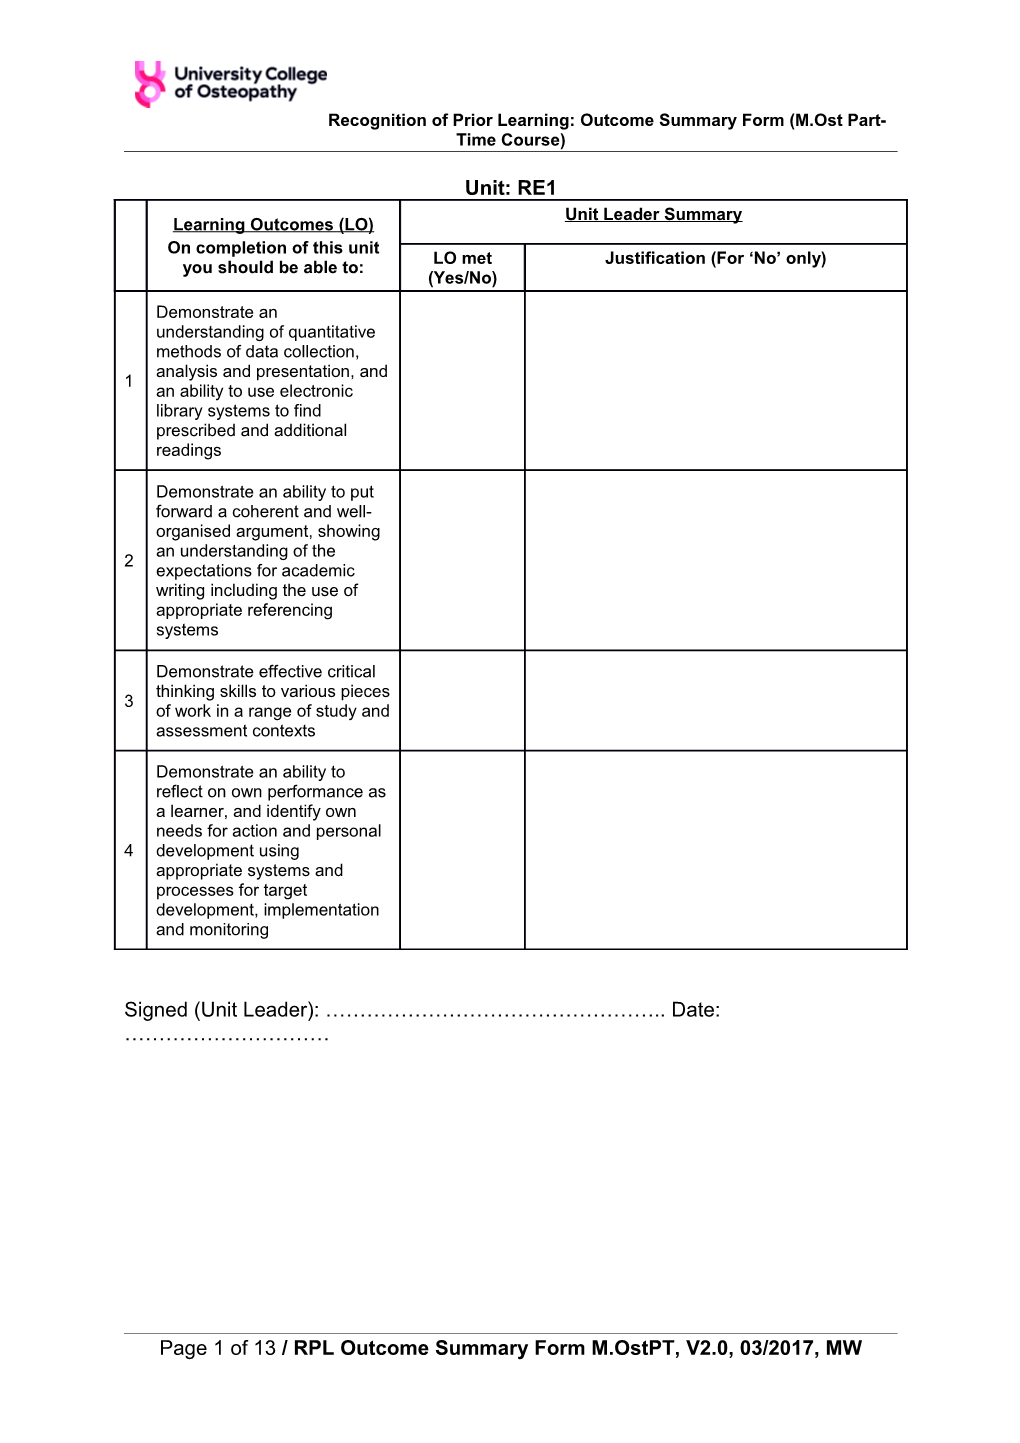 Recognition of Prior Learning: Outcome Summary Form (M.Ost Part-Time Course)